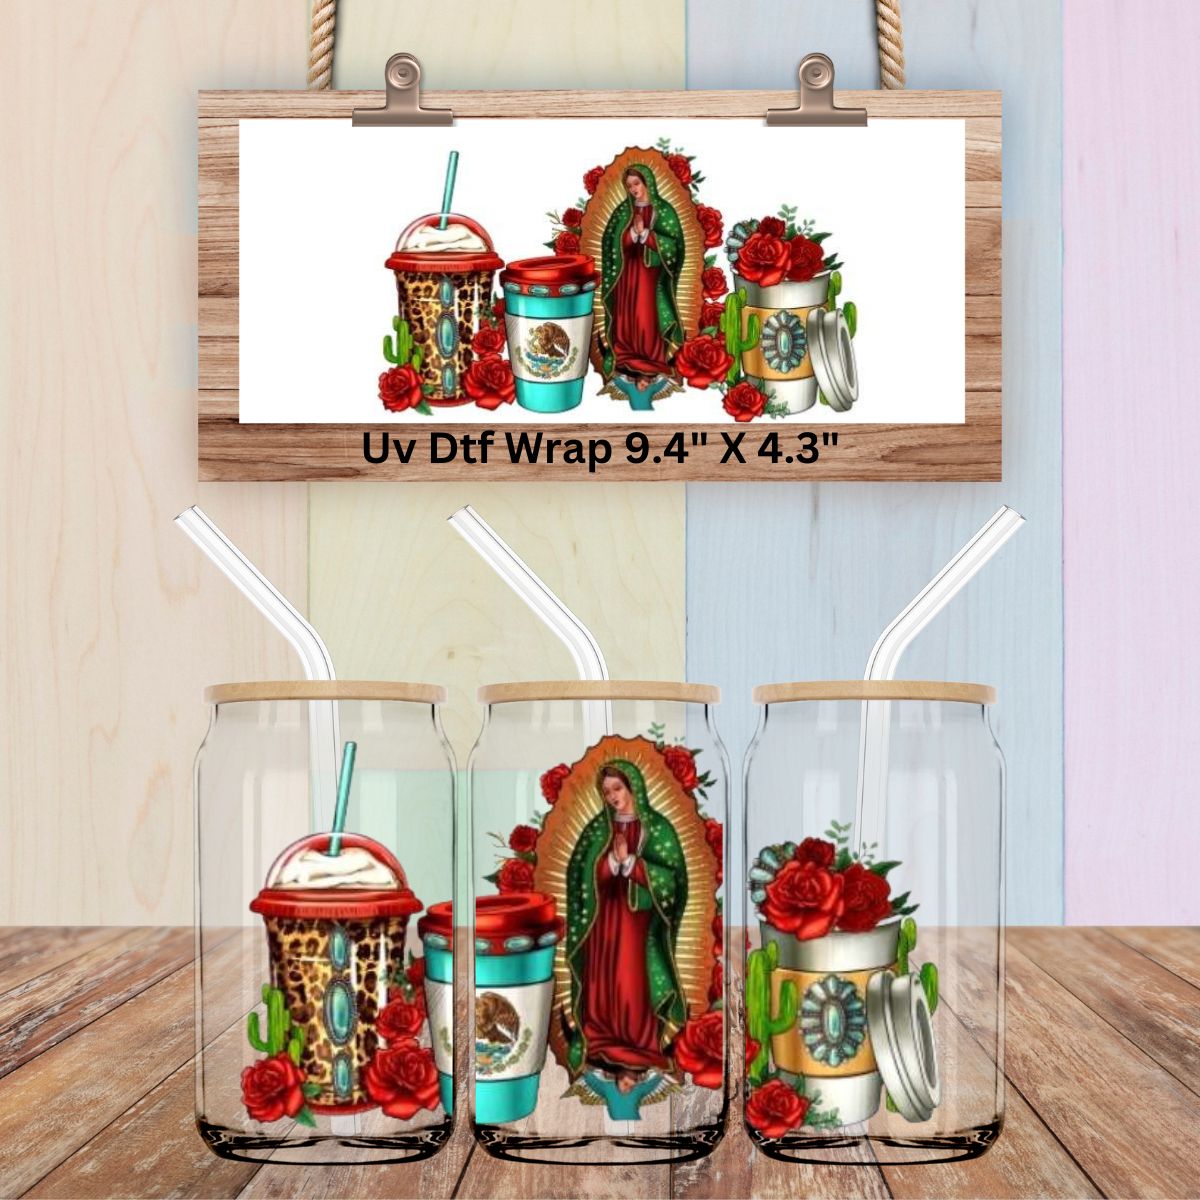 Uv Dtf Wrap Virgin Mother Mary Coffees Western style design